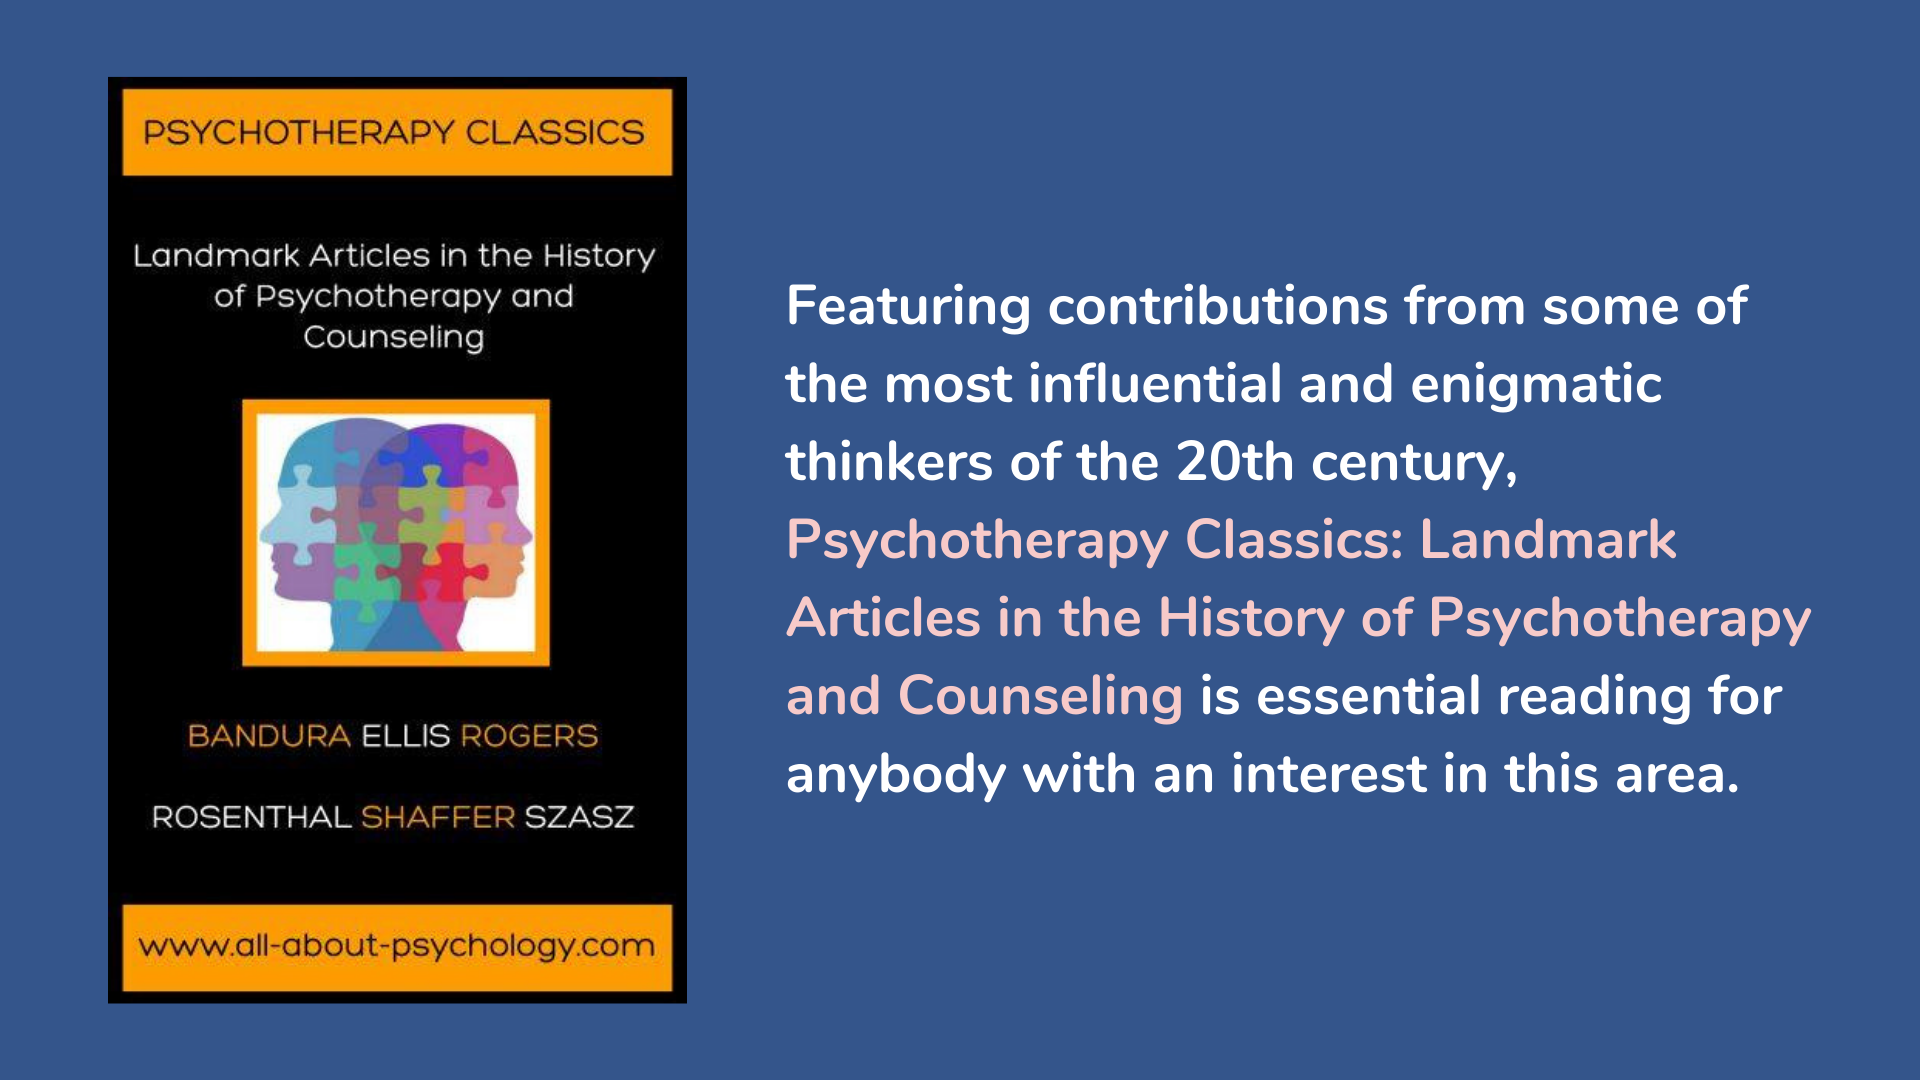 Psychotherapy Classics: Landmark Articles in the History of Psychotherapy and Counseling Book Cover and Description